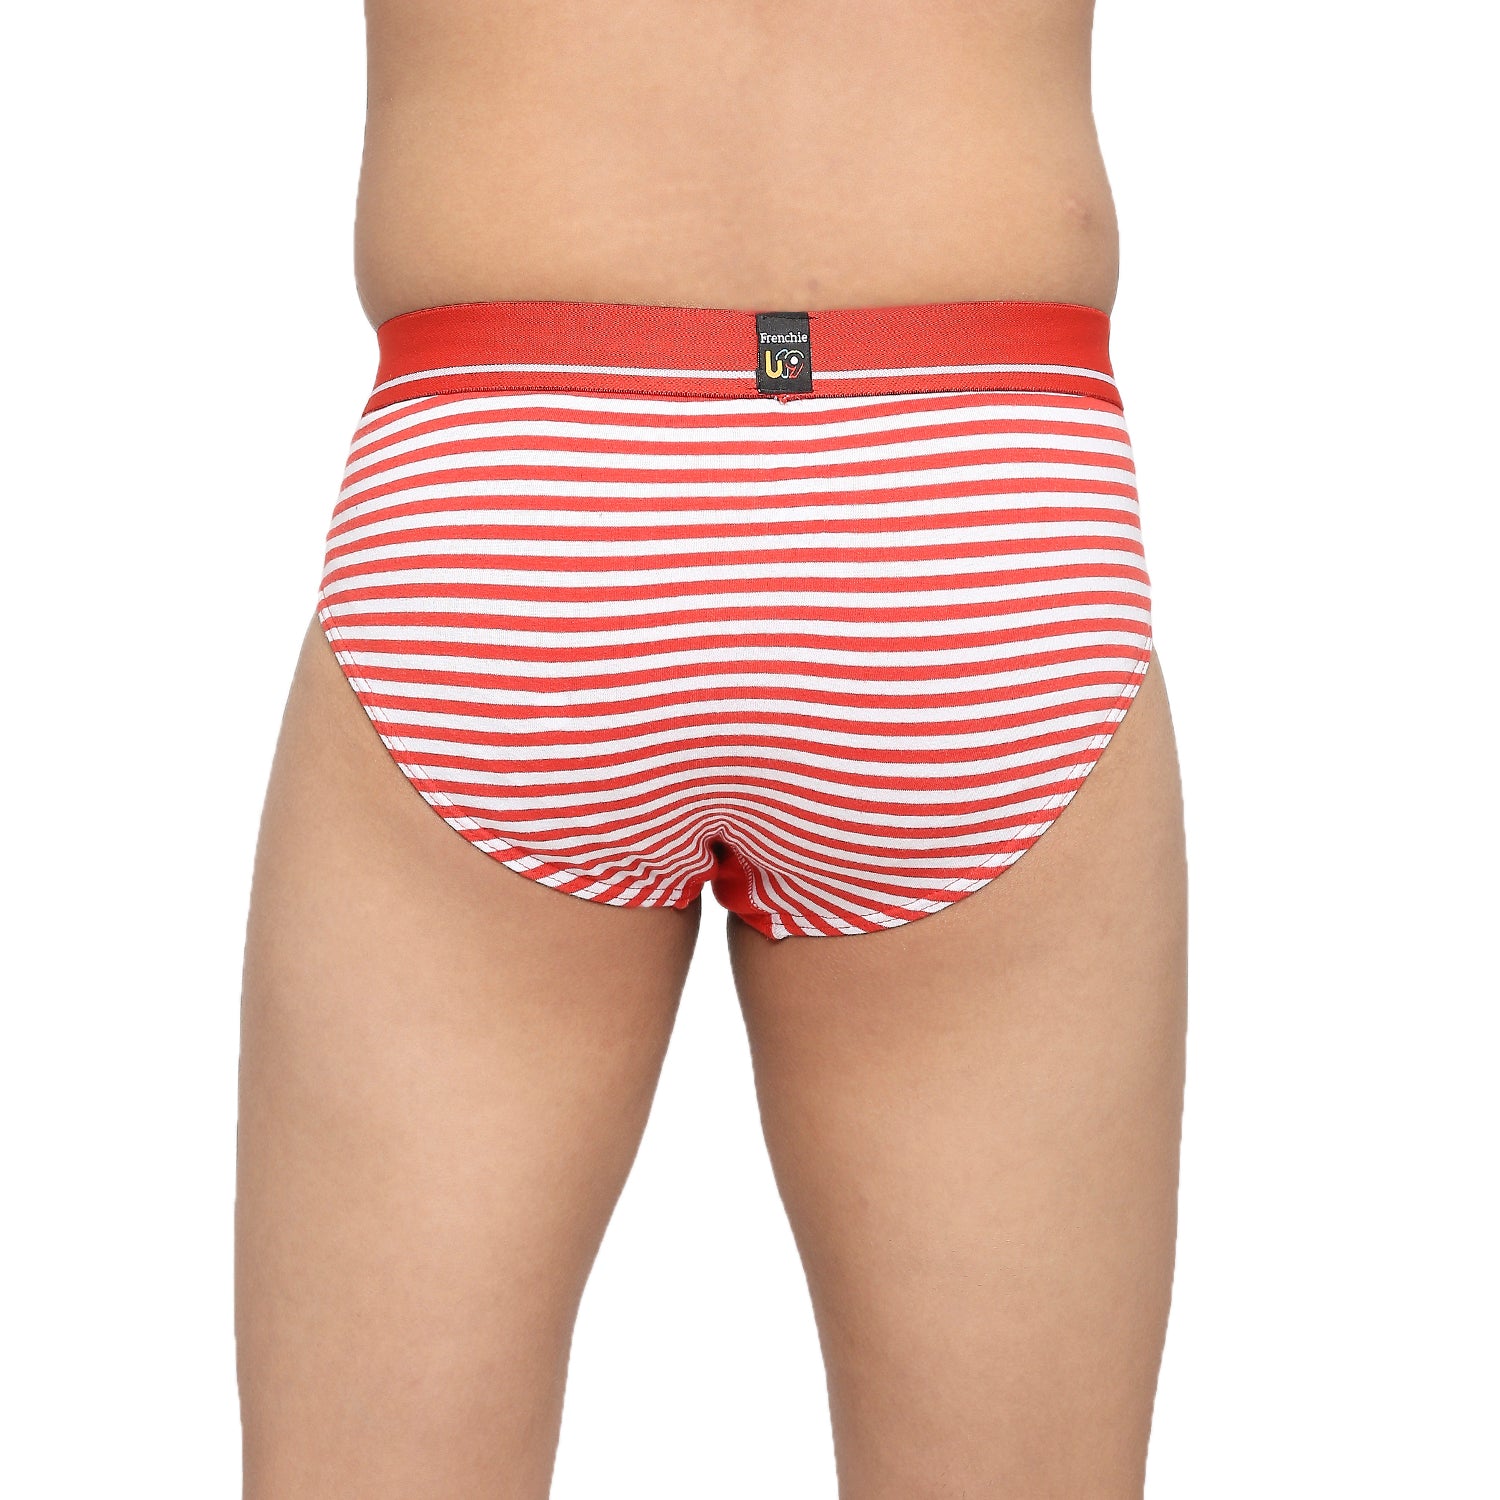 FRENCHIE Teenagers Cotton Brief Navy and Red - Pack of 2